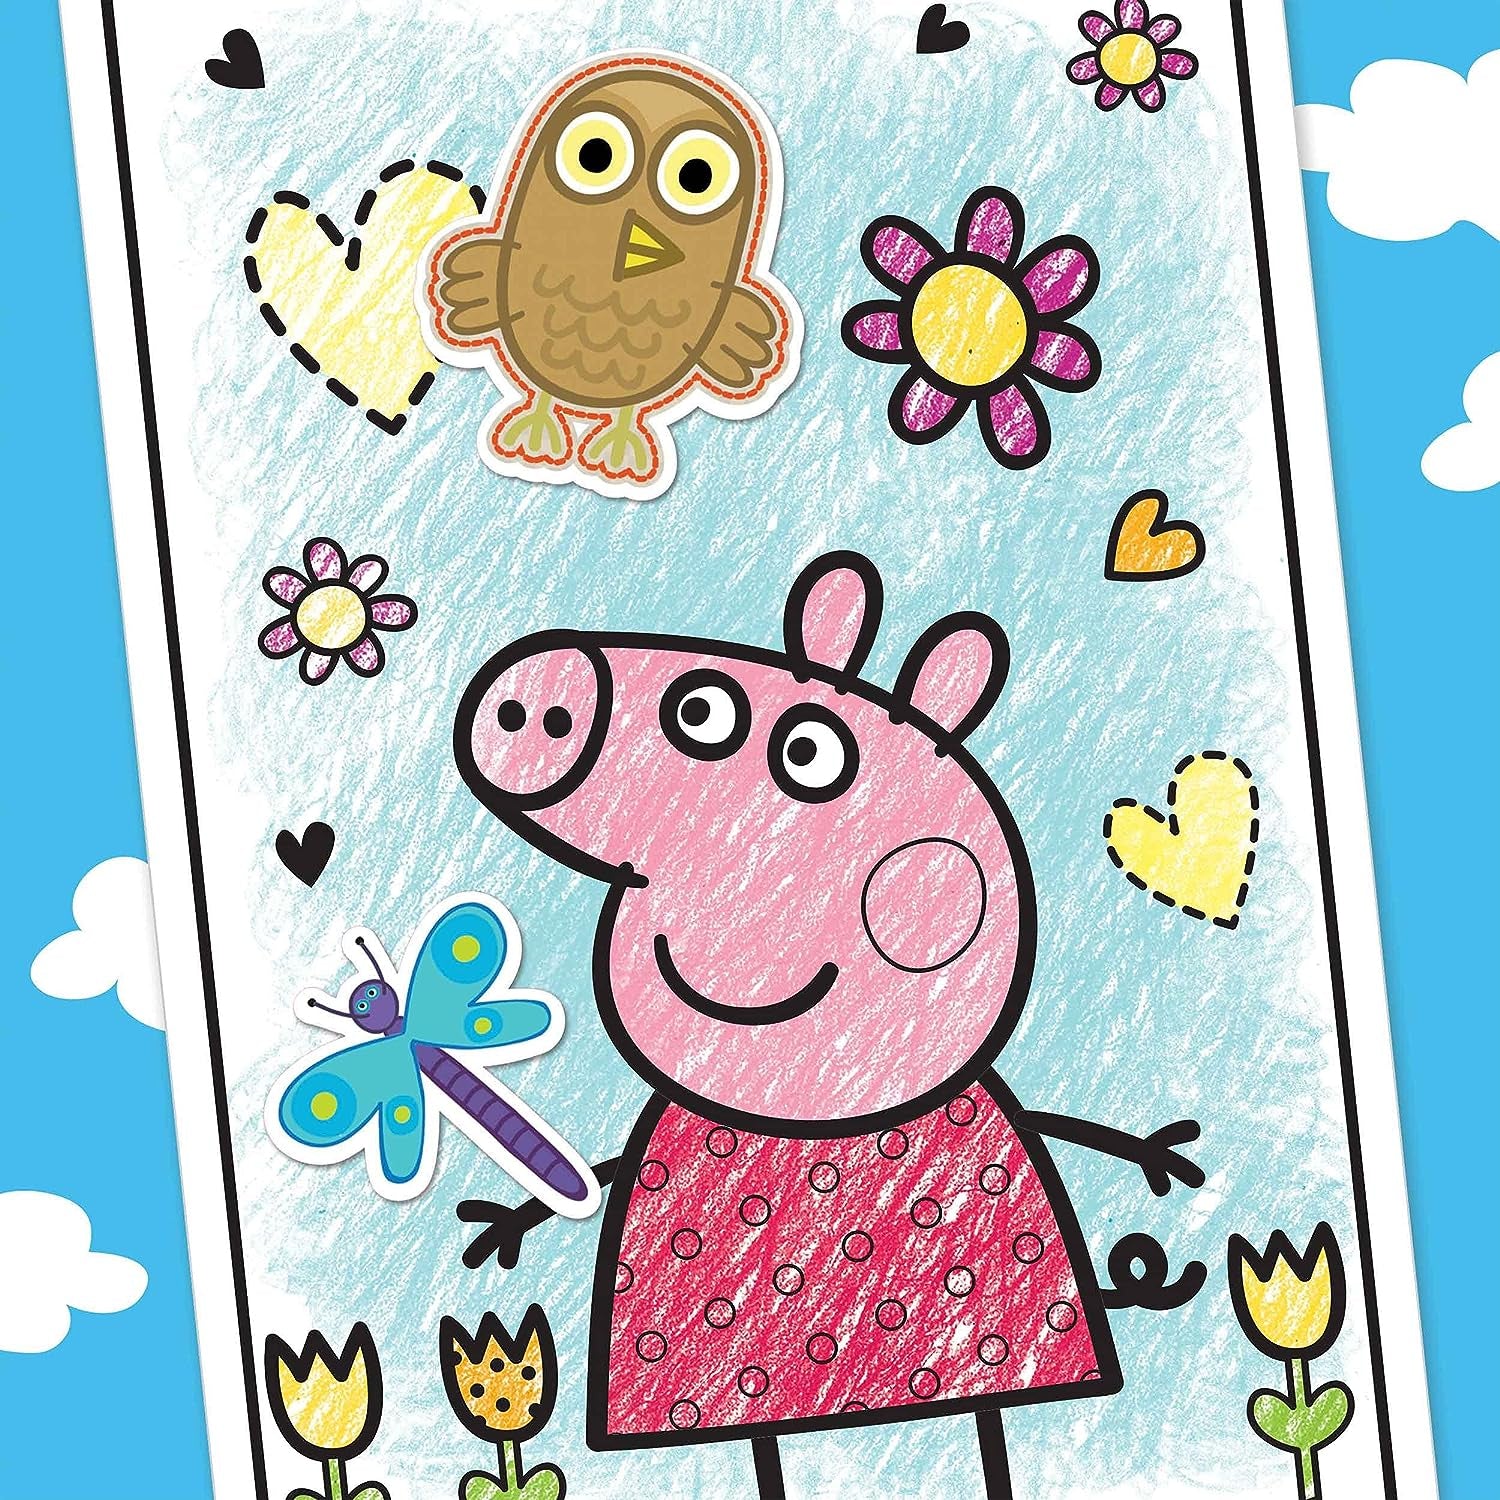 9PC Peppa Pig Coloring Book Kit Washable Markers Drawing